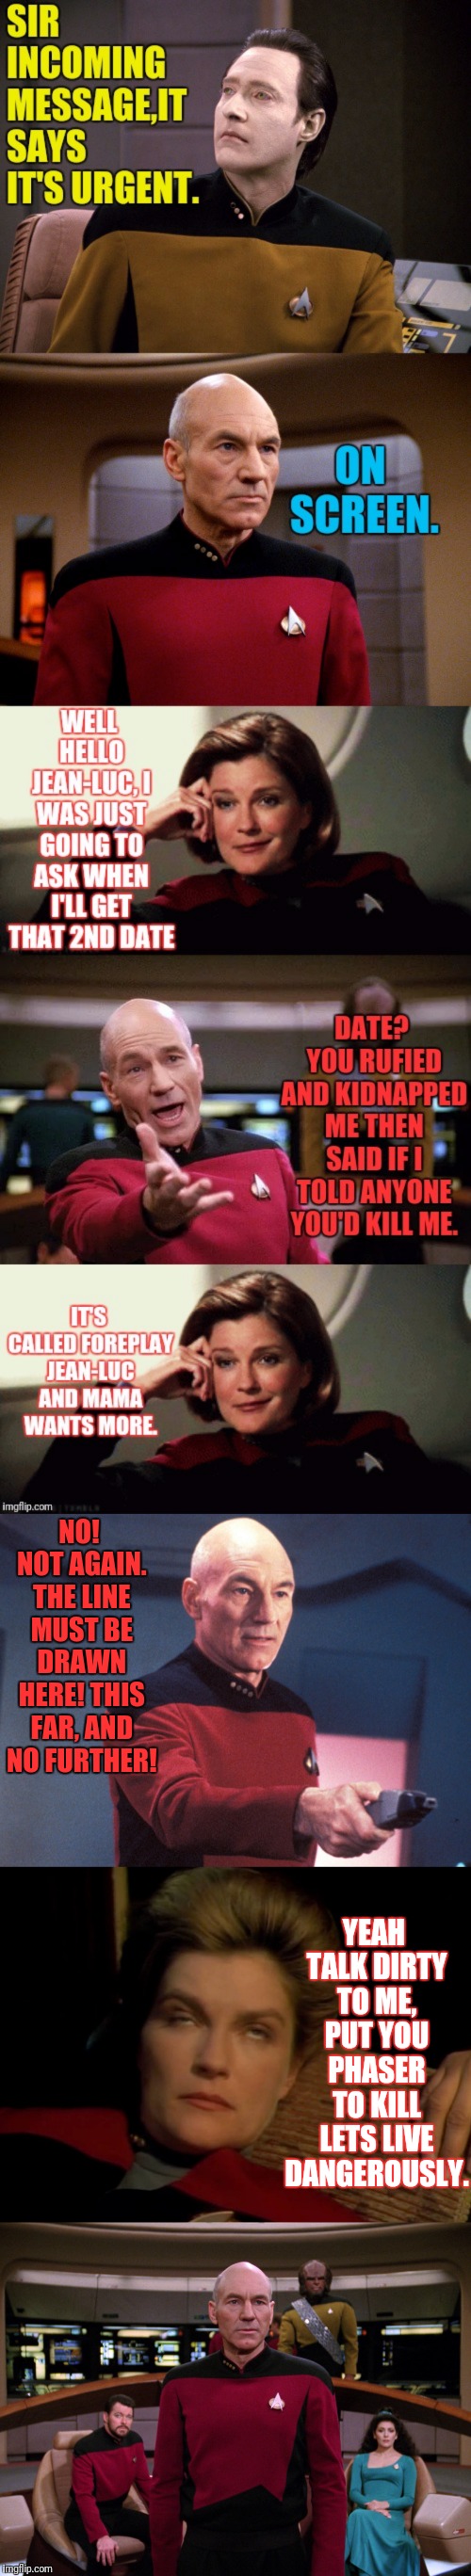 Picards Dating Life | NO! NOT AGAIN. THE LINE MUST BE DRAWN HERE! THIS FAR, AND NO FURTHER! YEAH TALK DIRTY TO ME, PUT YOU PHASER TO KILL LETS LIVE DANGEROUSLY. | image tagged in captain picard,picard,janeway,star trek the next generation,star trek voyager,star trek tng | made w/ Imgflip meme maker